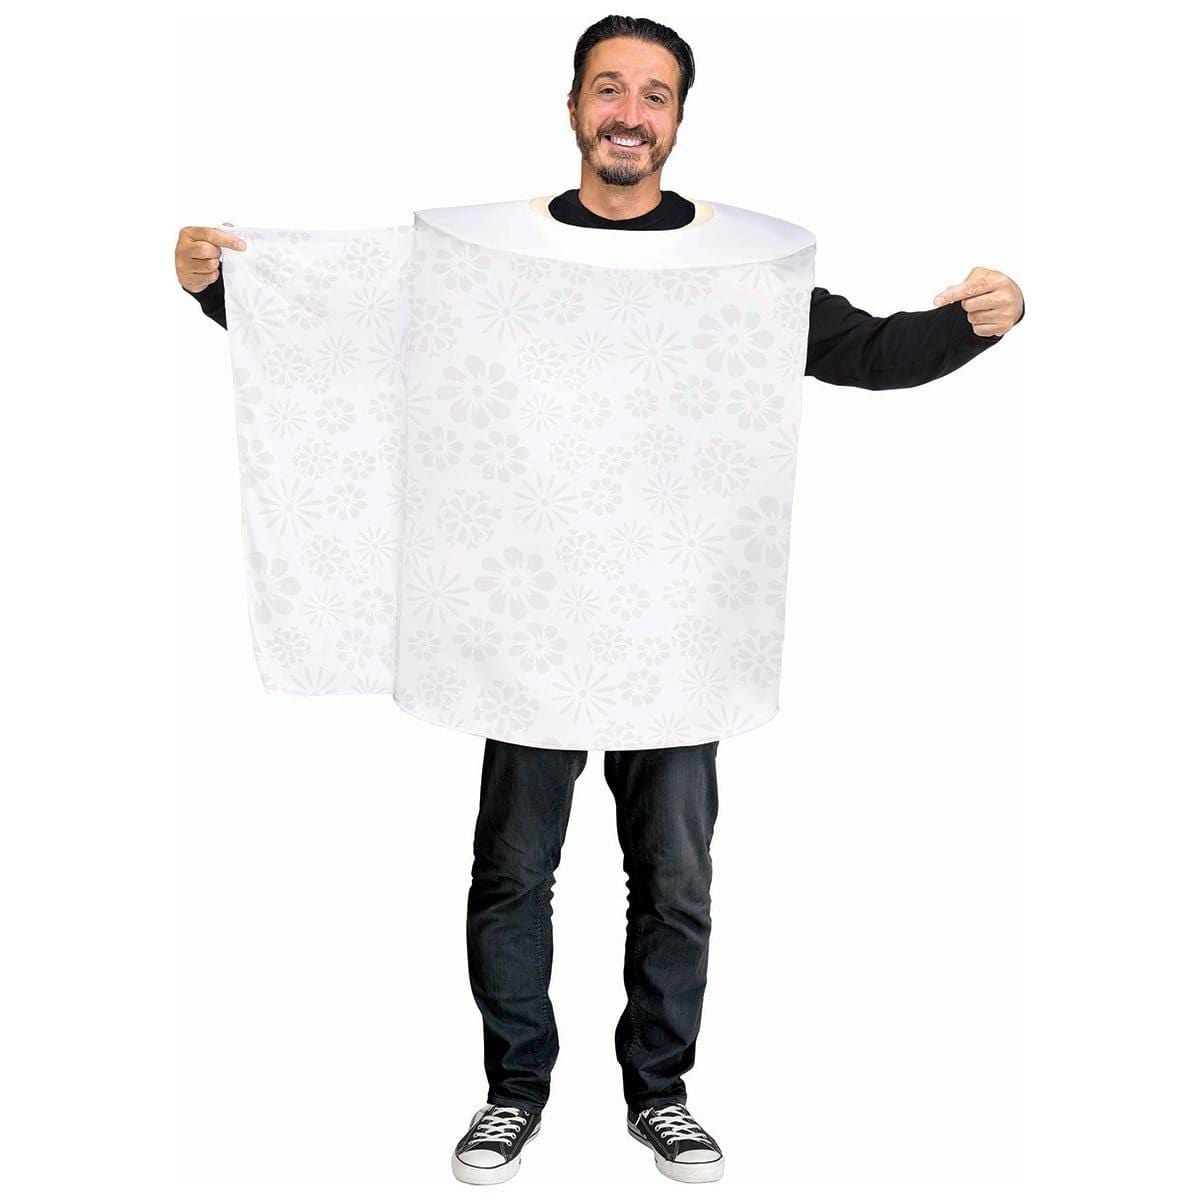 Buy Costumes Toilet Paper Roll Costume for Adults sold at Party Expert